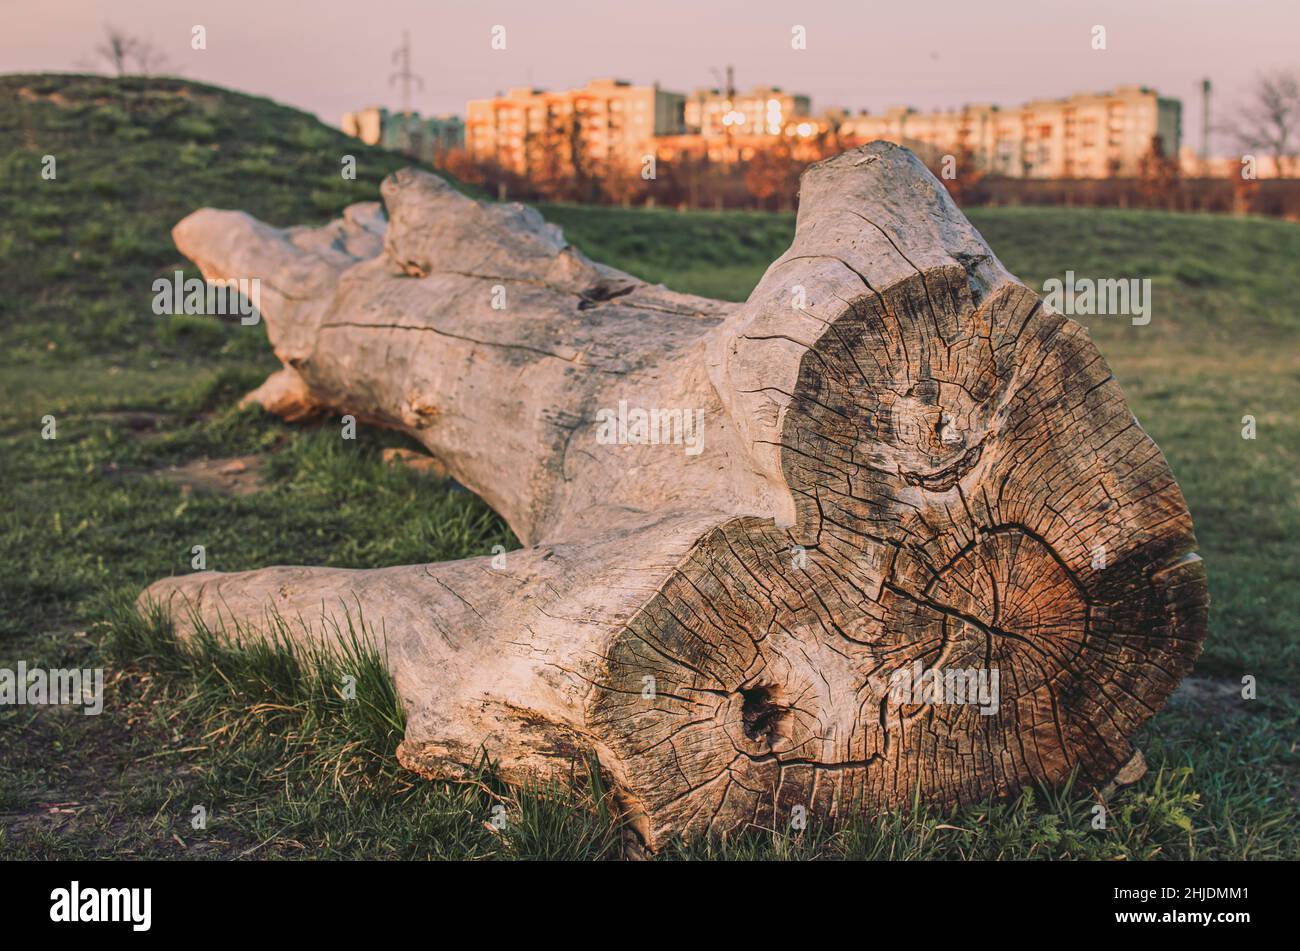 Big wooden log in the park surrounded by green grass Stock Photo